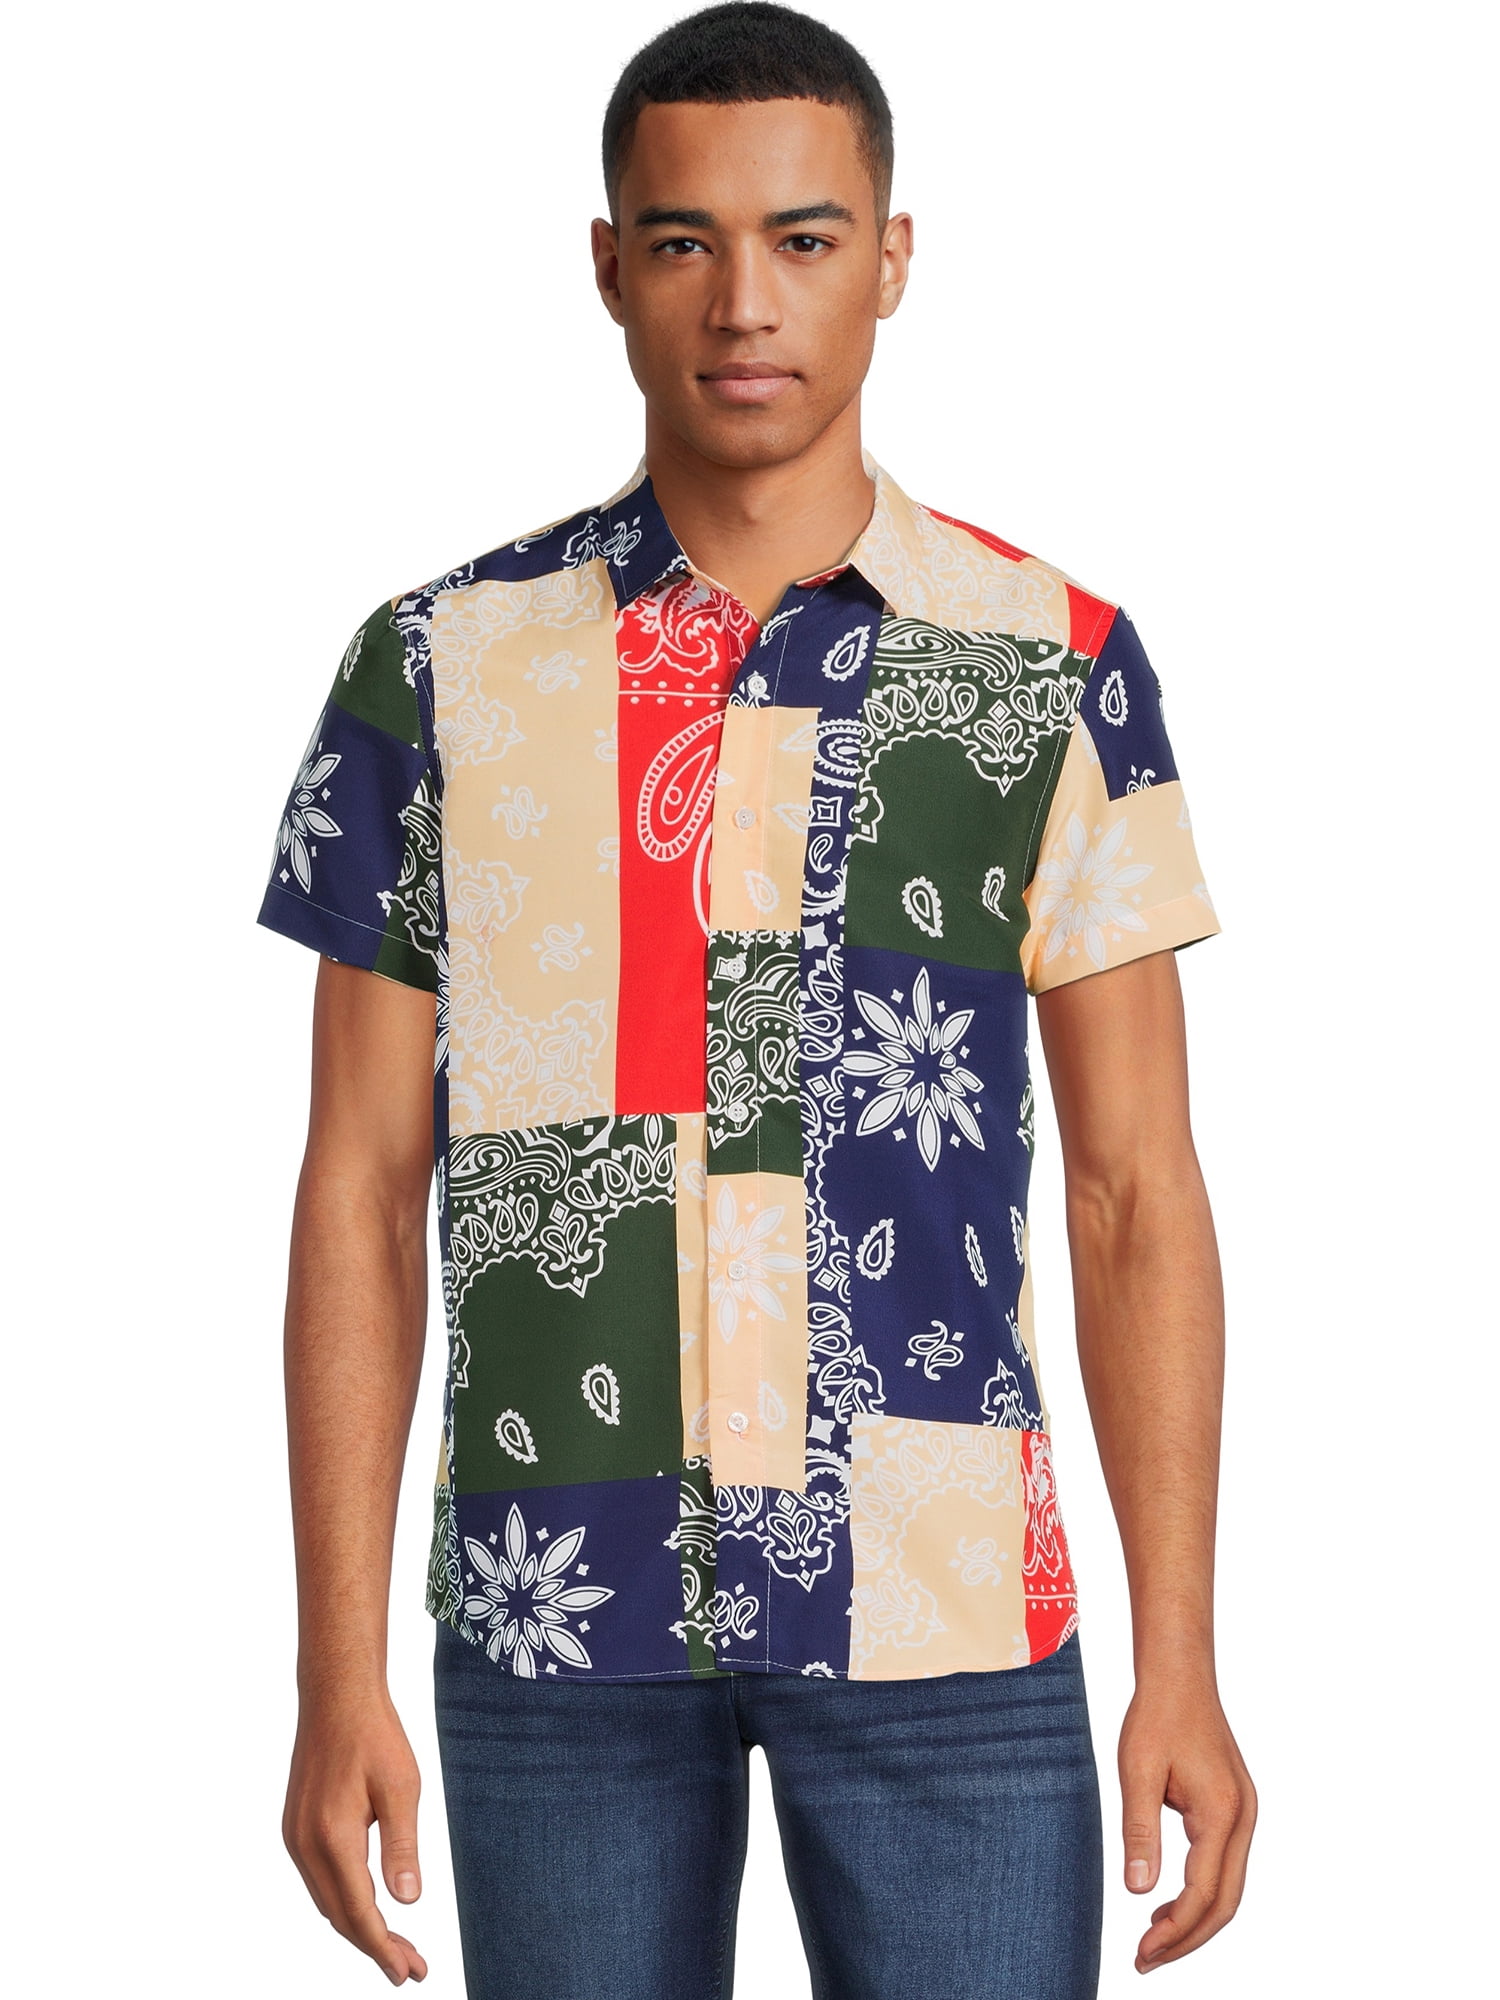 Rocawear Men’s Printed Button Front Shirt with Short Sleeves - Walmart.com